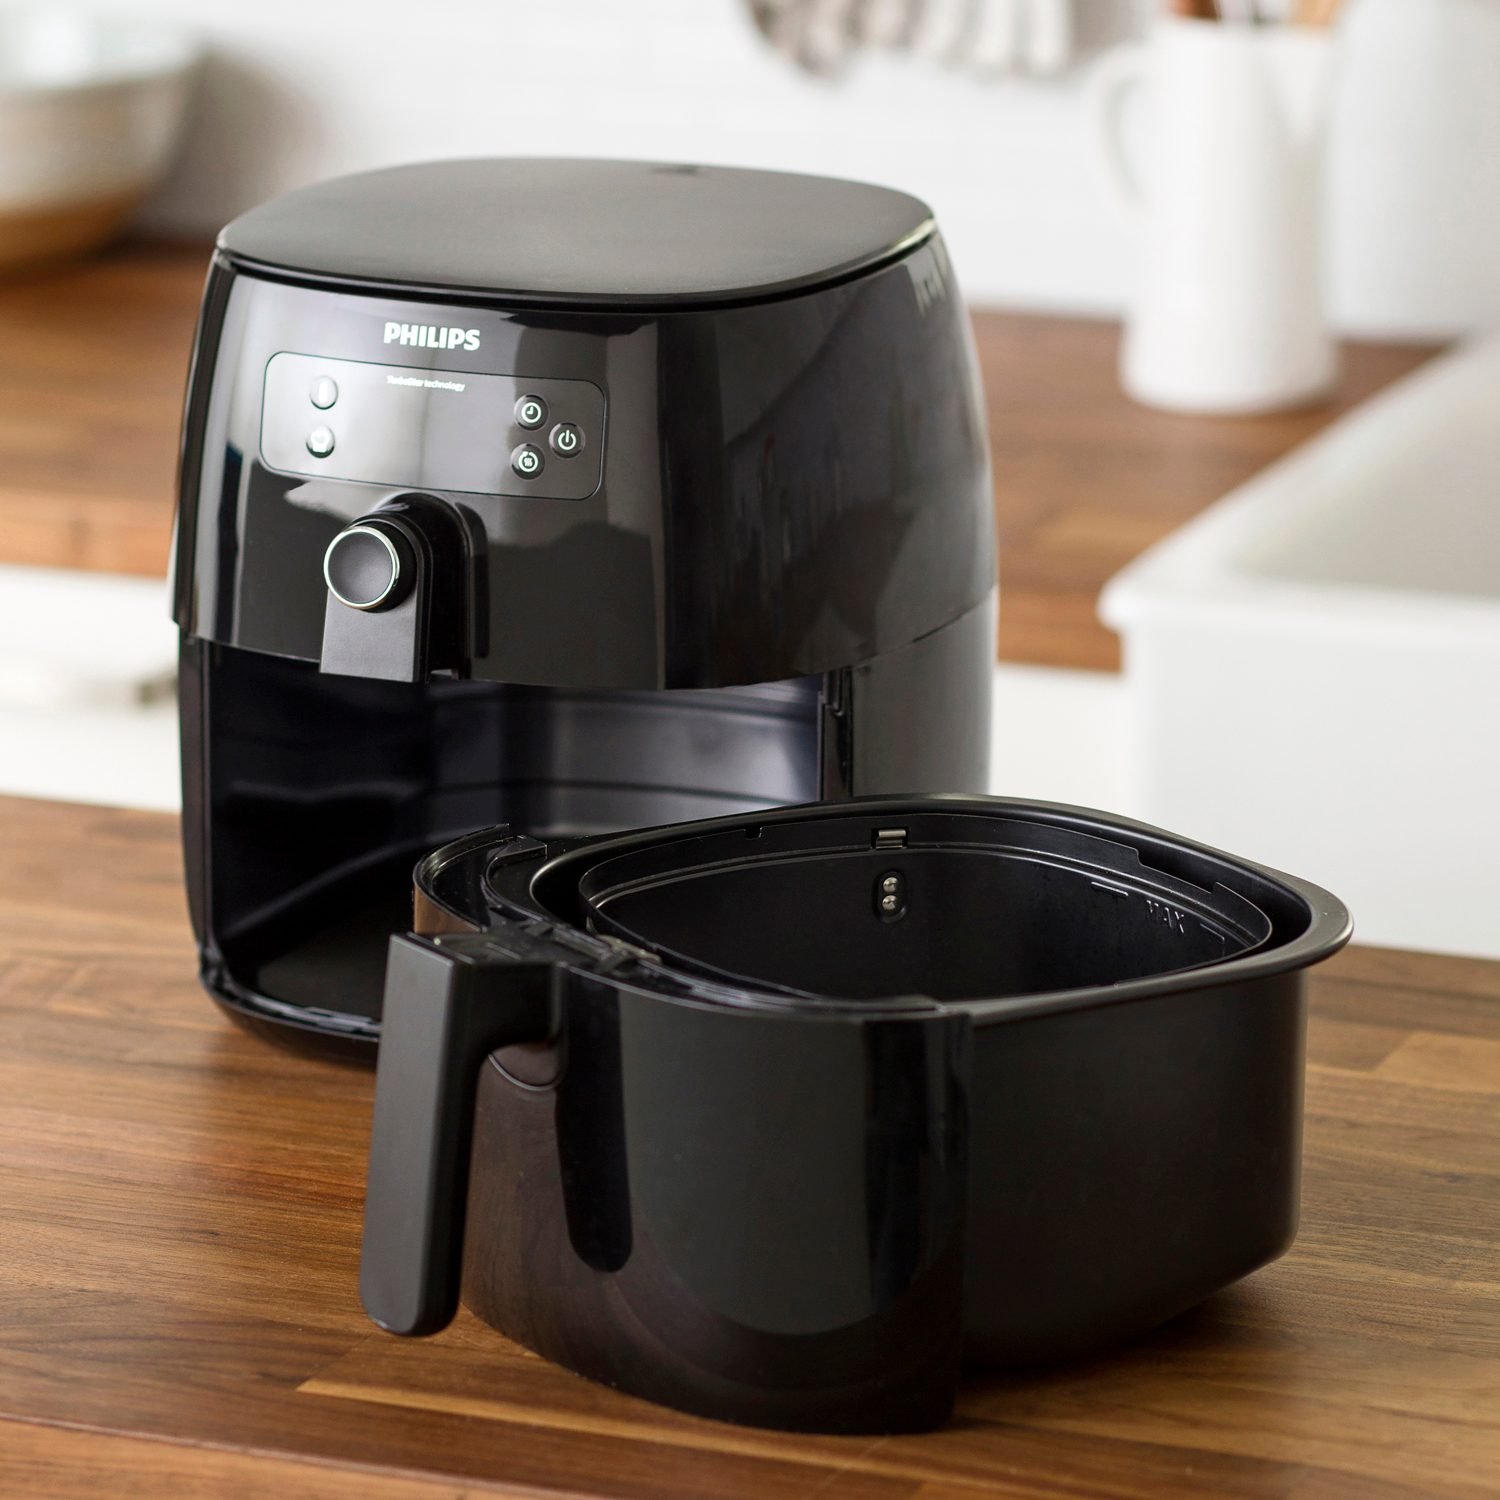 https://www.tasteofhome.com/wp-content/uploads/2018/09/how-to-clean-an-air-fryer01_WCICINRB19_PU4352_C06_26_2bC.jpg